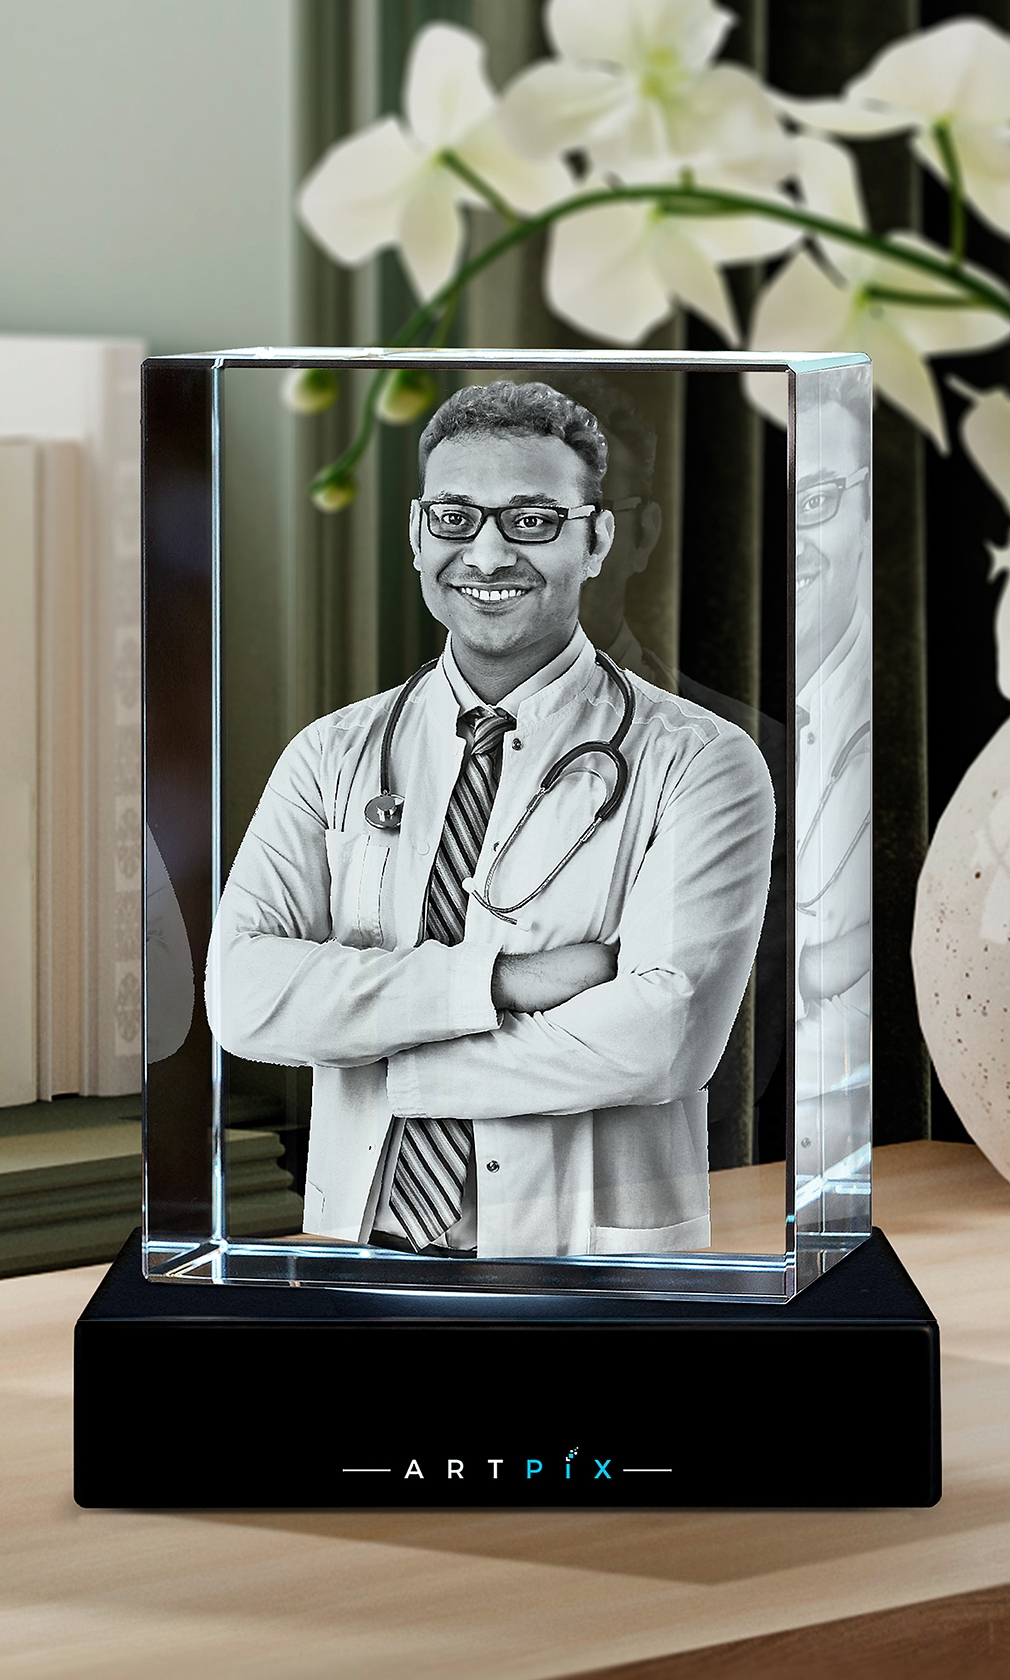 A 3D photo of a successful doctor engraved inside a crystal award.